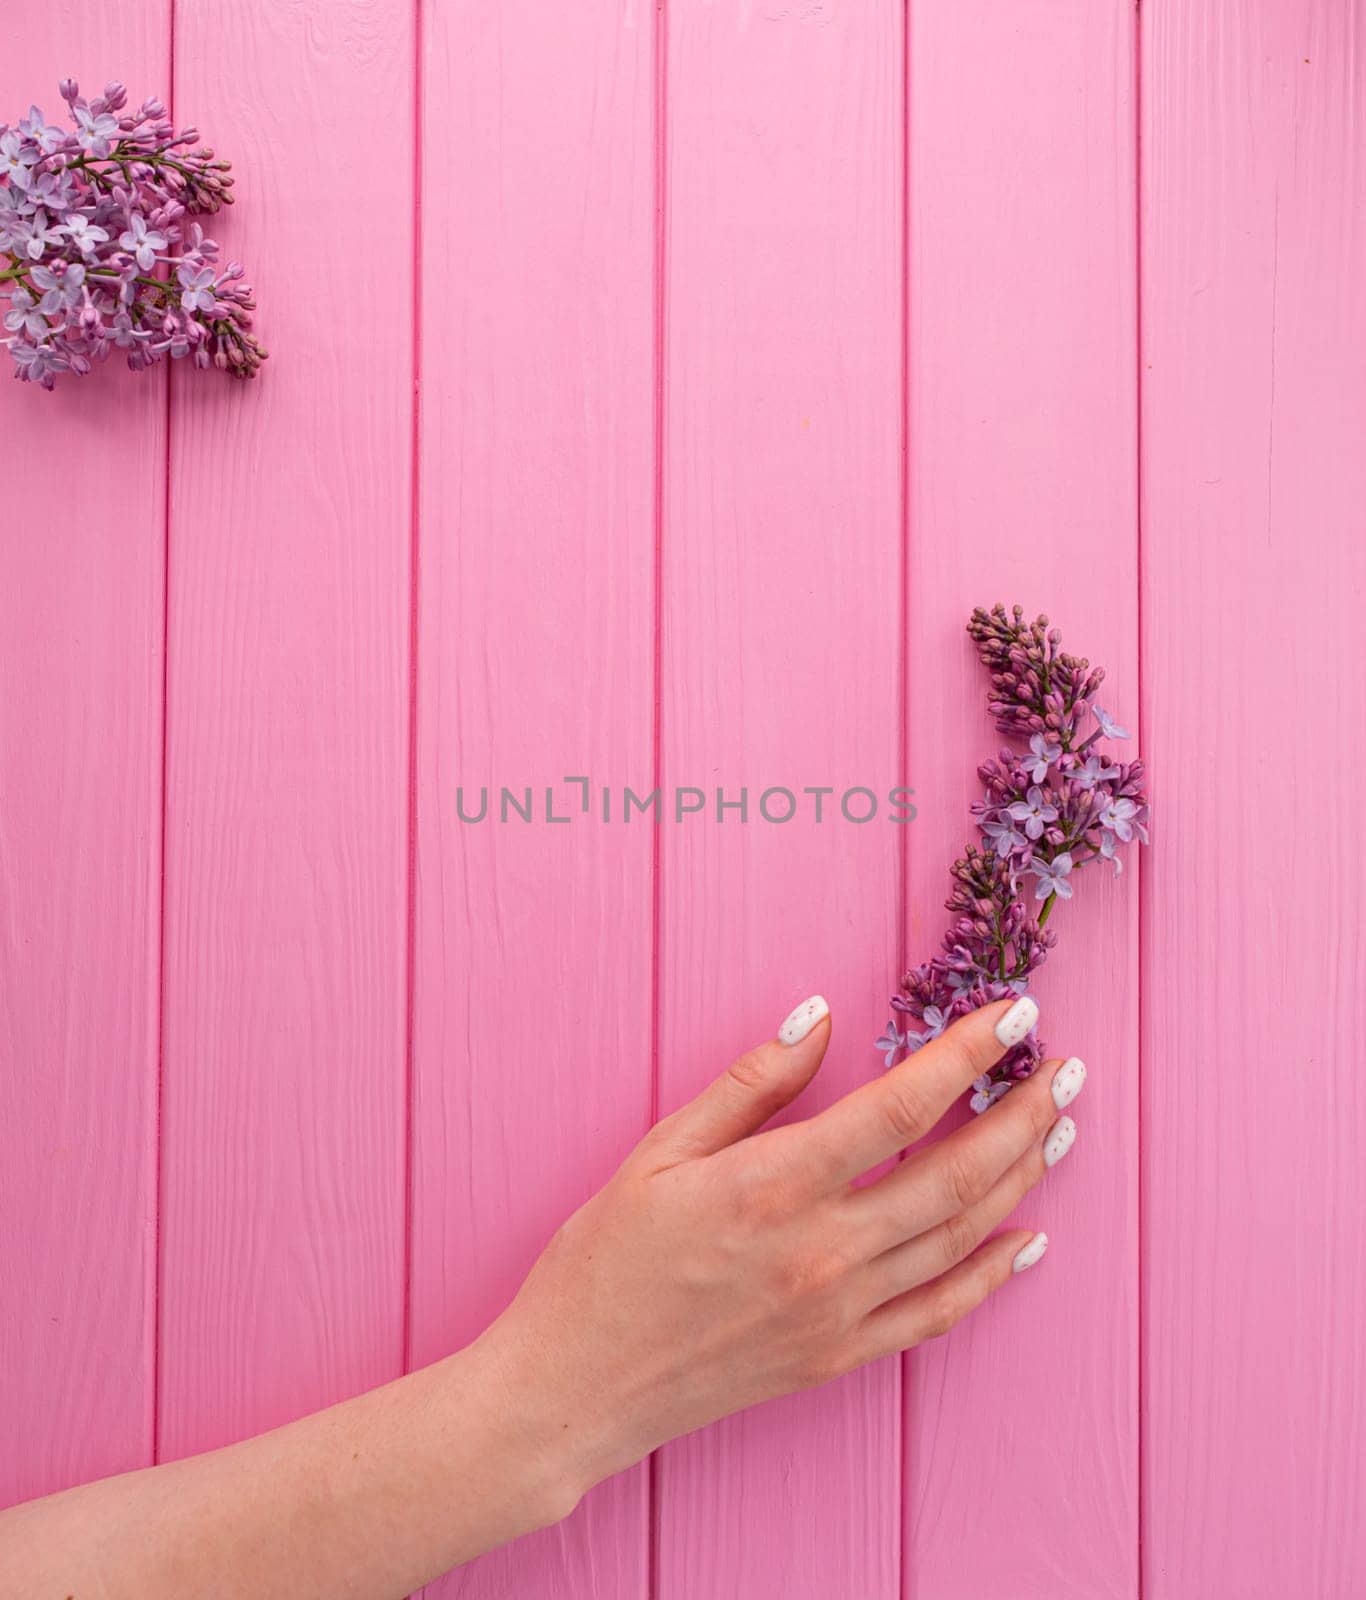 Summer abstract background mockup template free copy space for text pattern sample top view above pink wooden board. blank empty area for inscription. woman hand manicure hold blossom flowers lilac